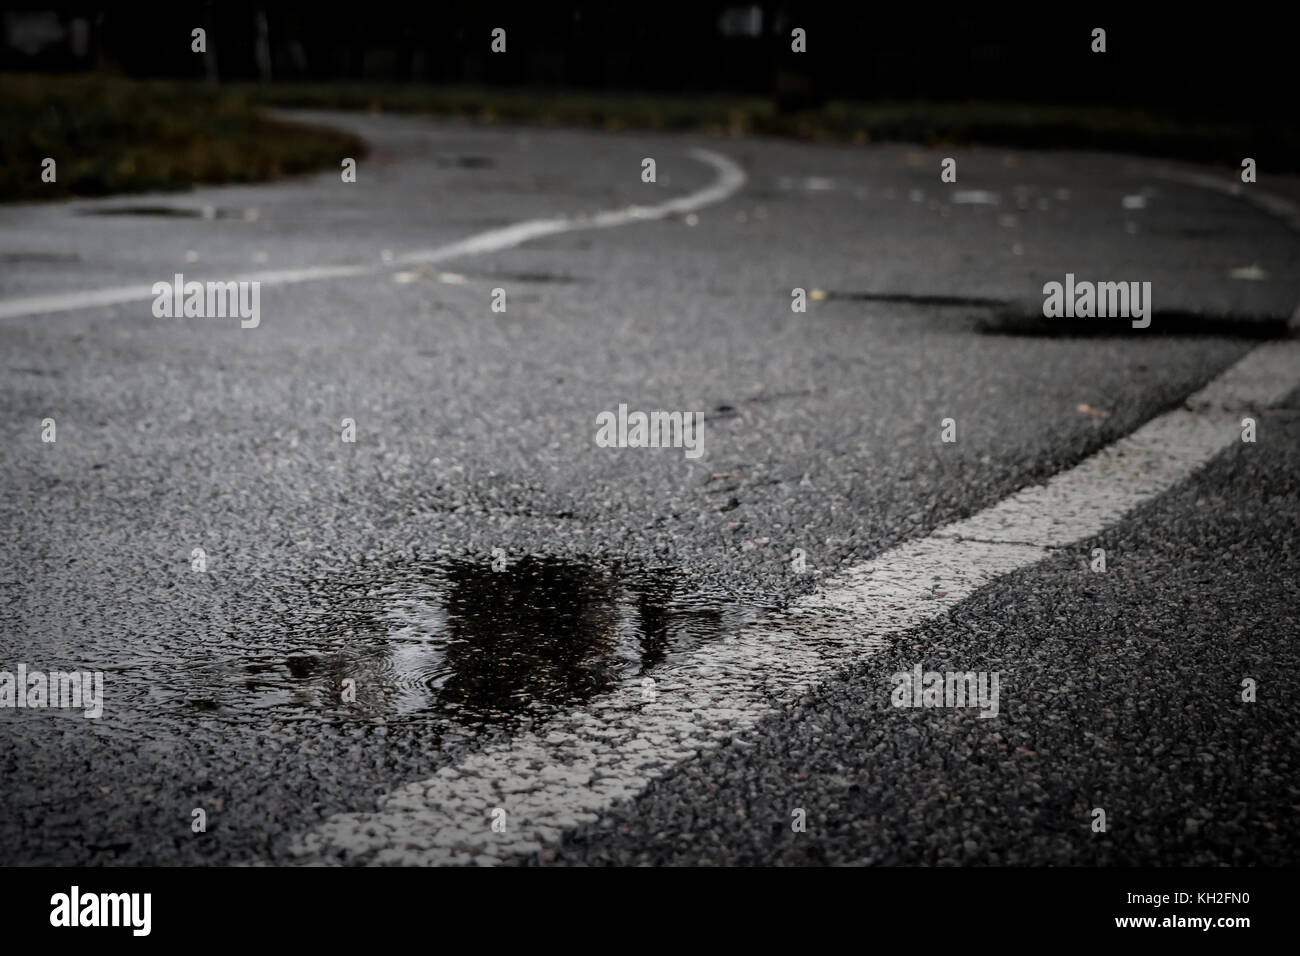 Asphalt track at an old school stadium during a rain with a puddle in the foreground. Dark autumn day Stock Photo